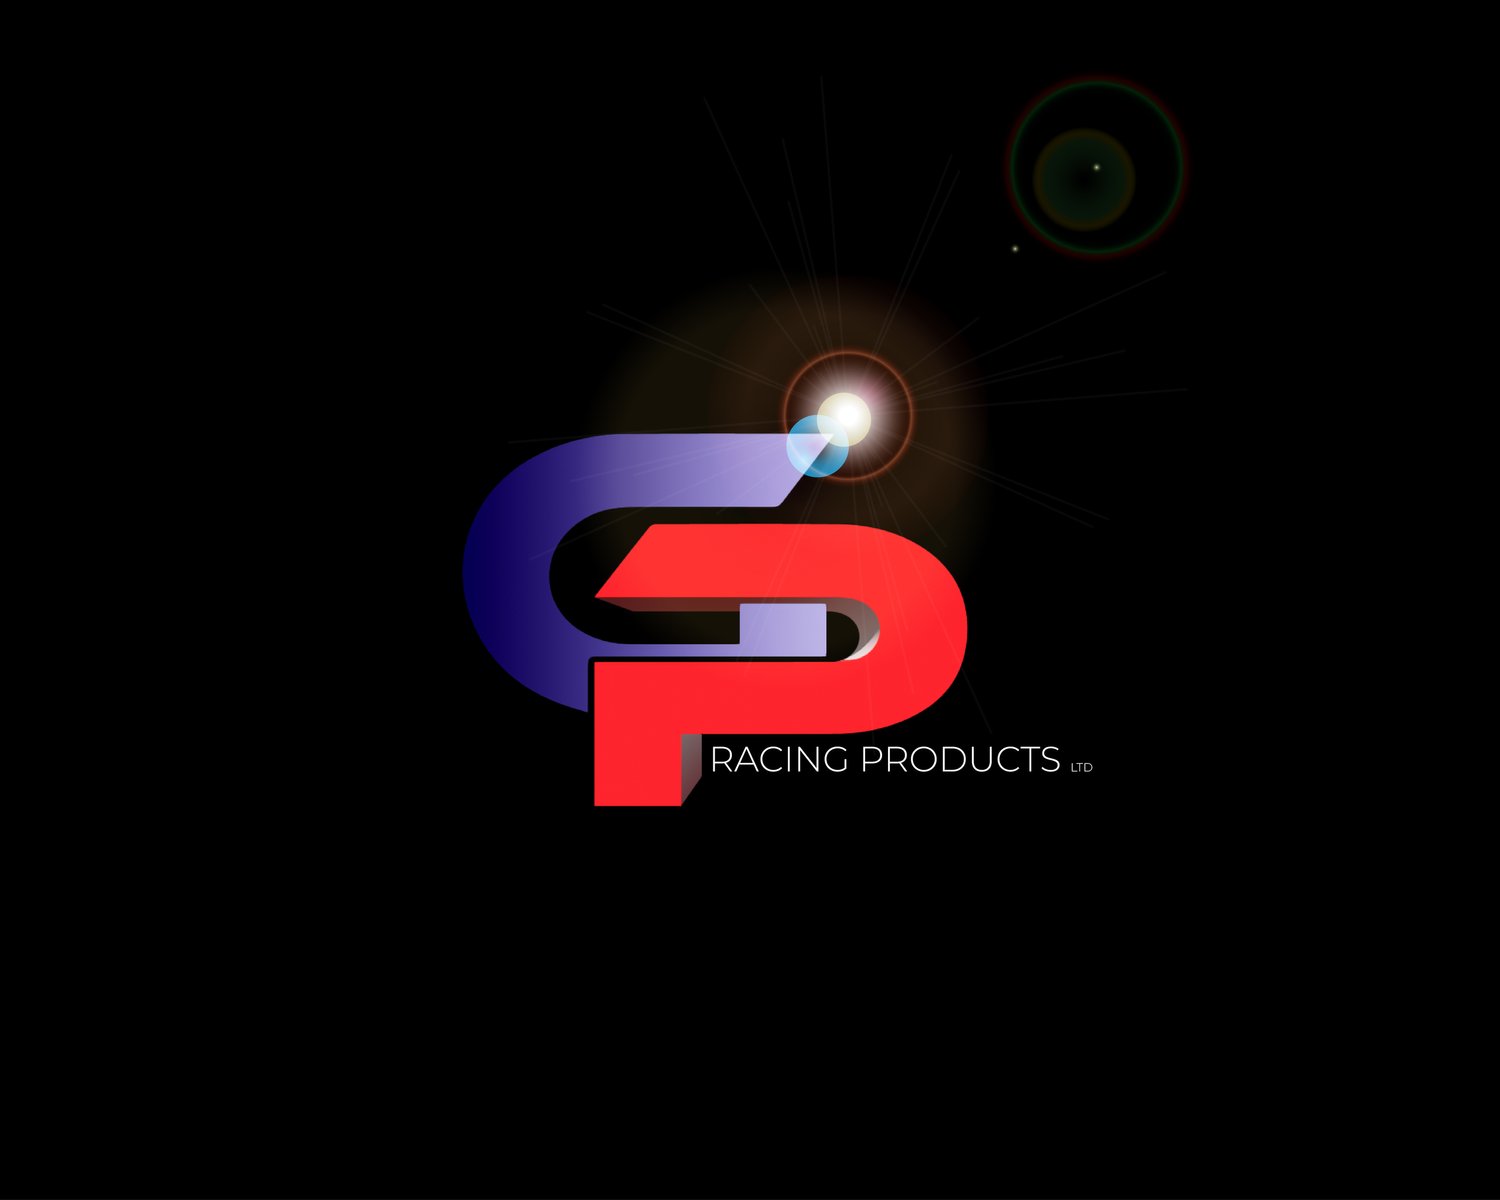 Welcome to GP Racing Products Ltd